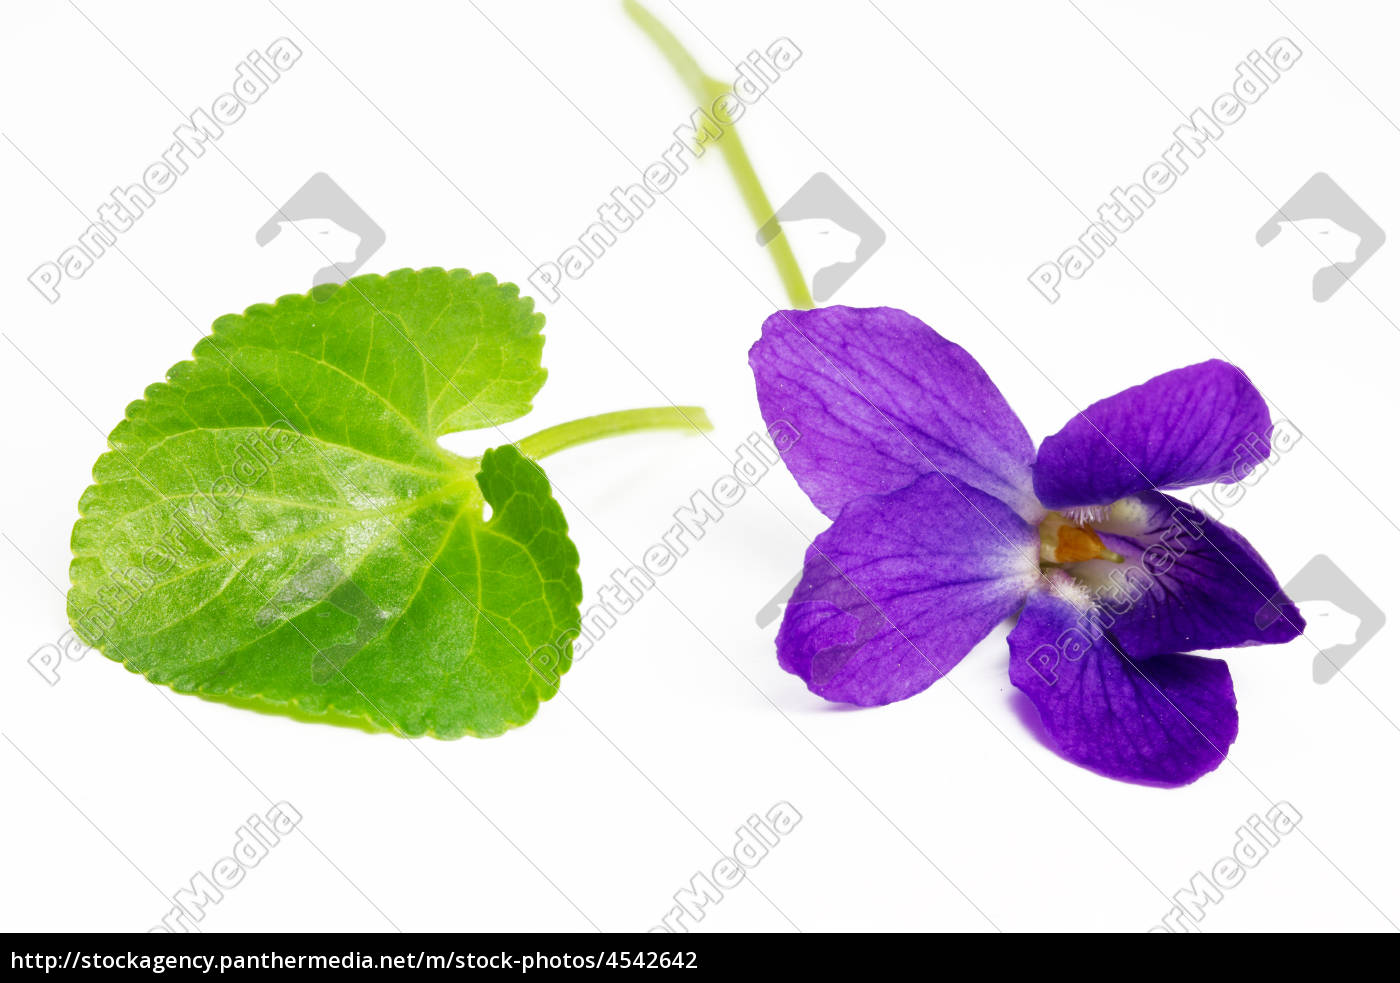 Free pictures of violets